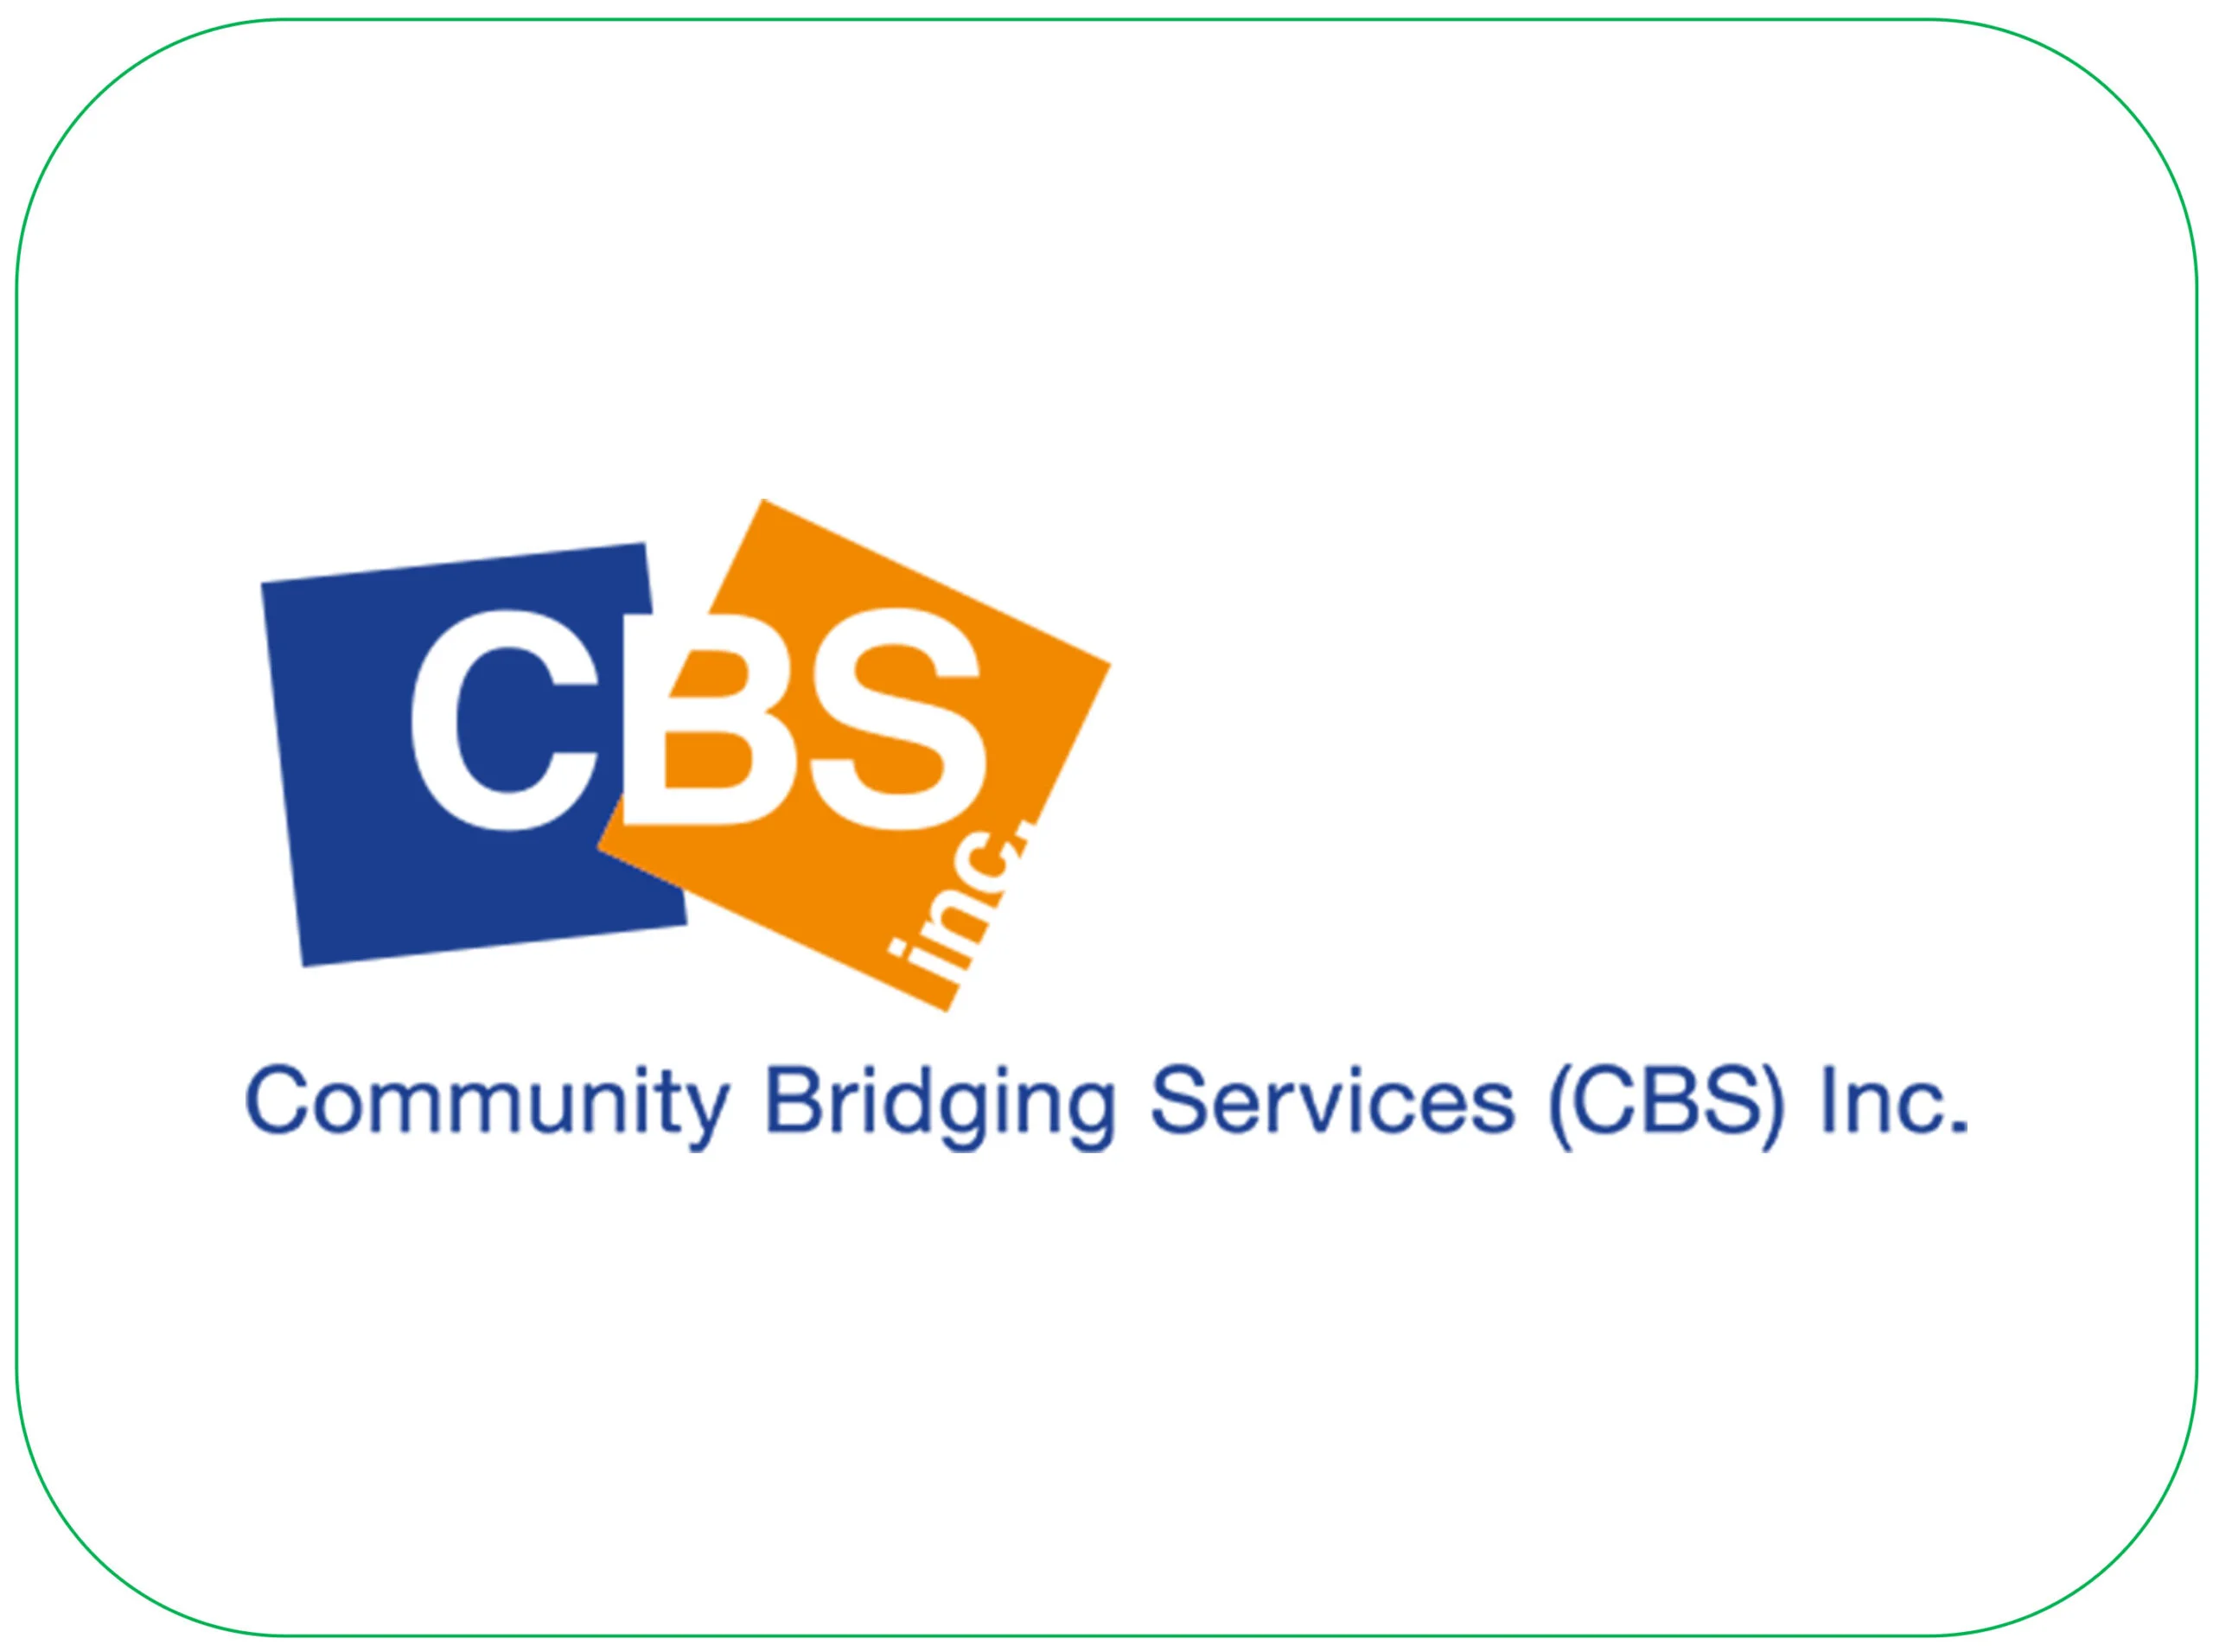 Recognised Workplaces - Community Bridging Services